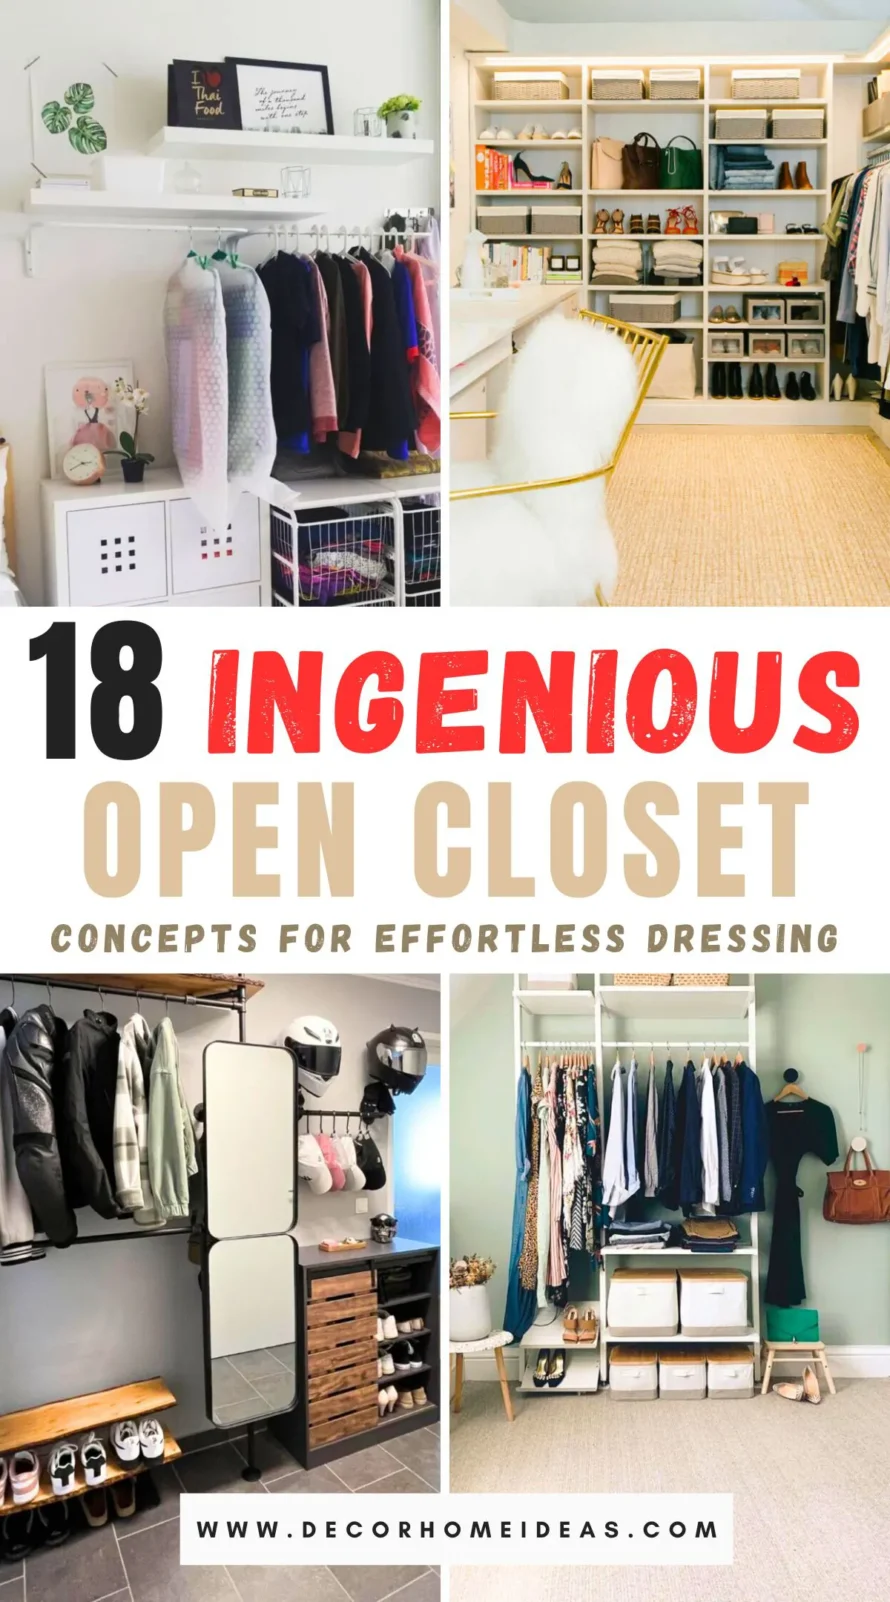 Discover 18 ingenious open closet concepts designed to make your dressing routine effortless and enjoyable. From minimalist racks to stylish shelving units, these ideas maximize space and add flair to any bedroom. Explore how to keep your wardrobe organized and accessible, transforming your mornings with ease and elegance.